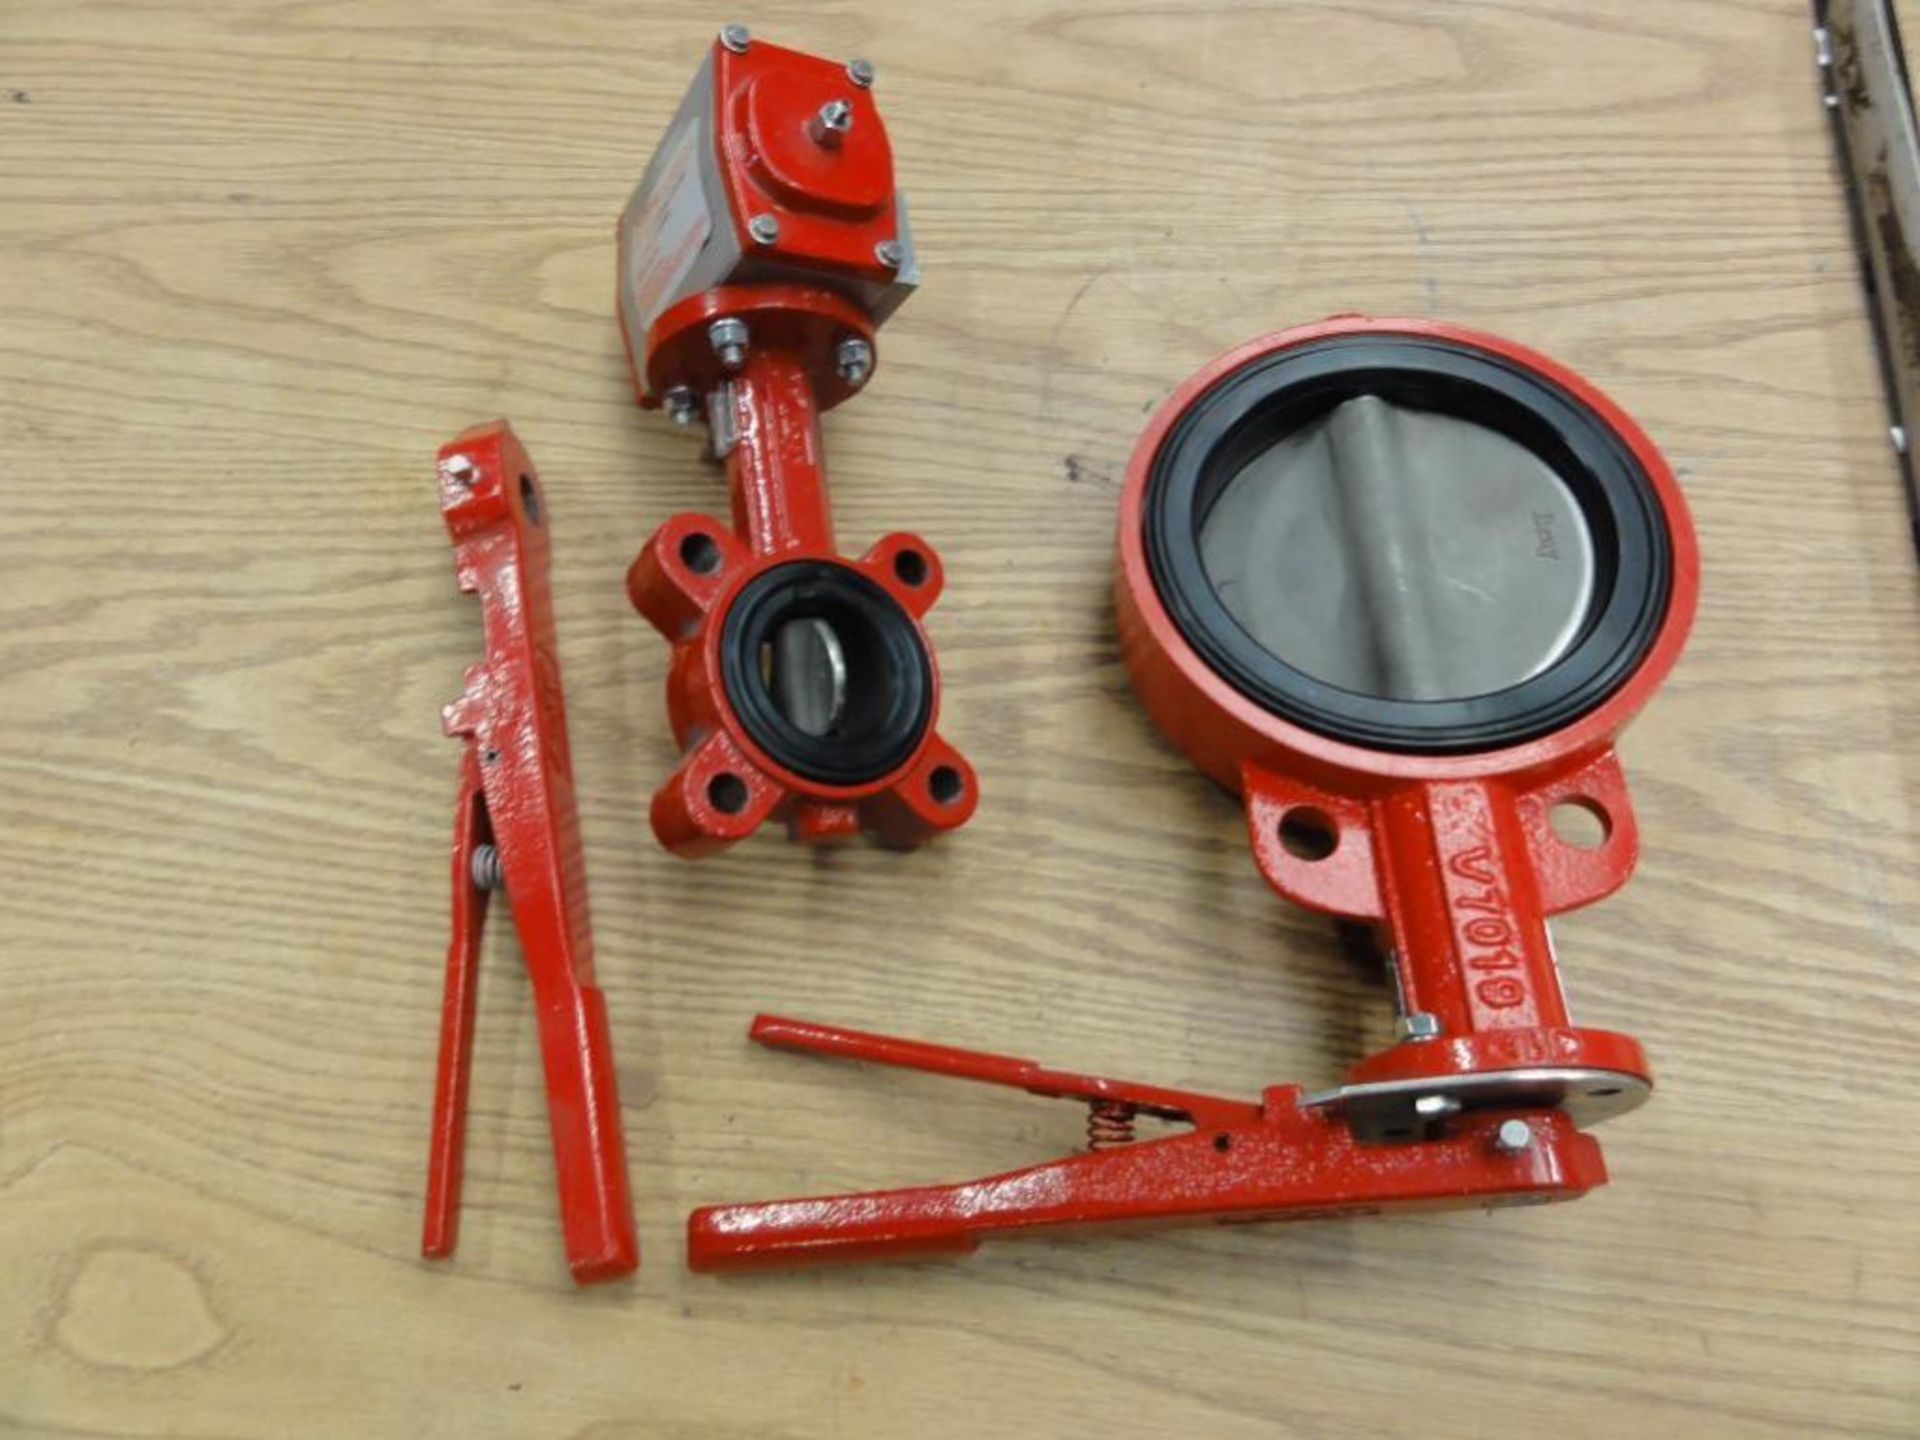 Assorted Bray Valves and Controllers to include: (1) 92-0630-11310-532 with 2" Butterfly Valve, (1)